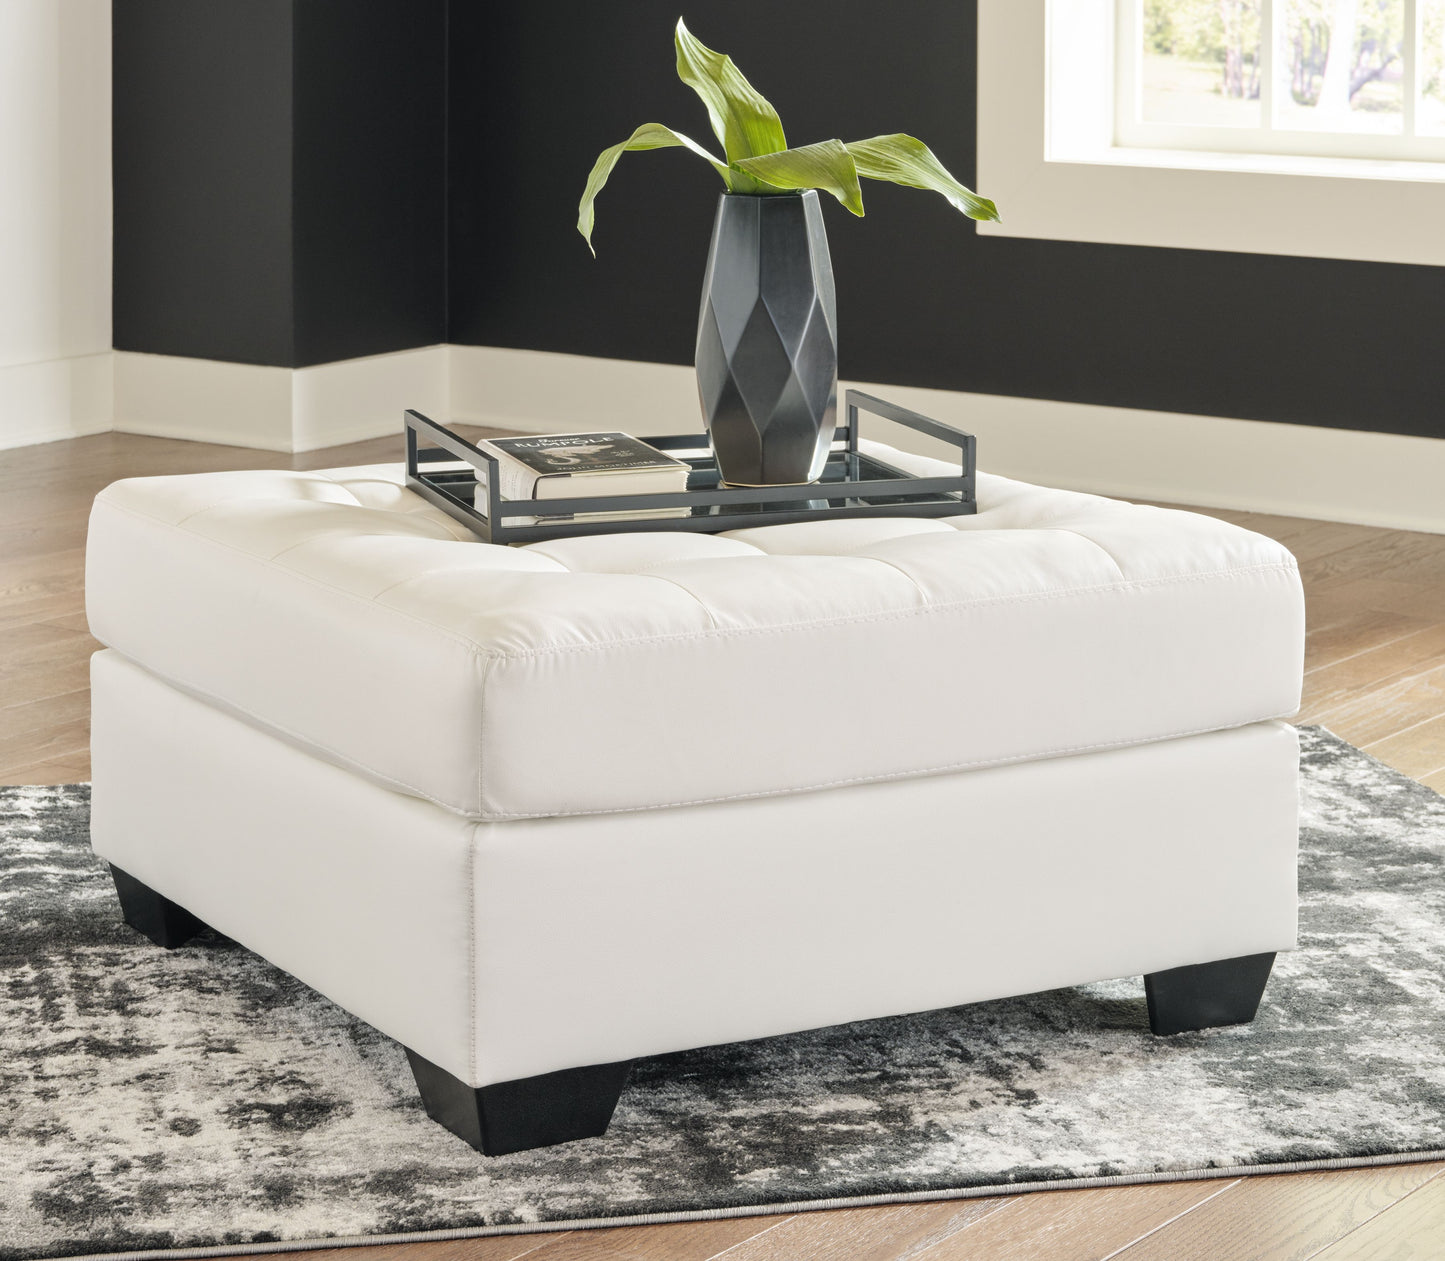 Donlen - White - 3 Pc. - Left Arm Facing Chaise 2 Pc Sectional, Ottoman